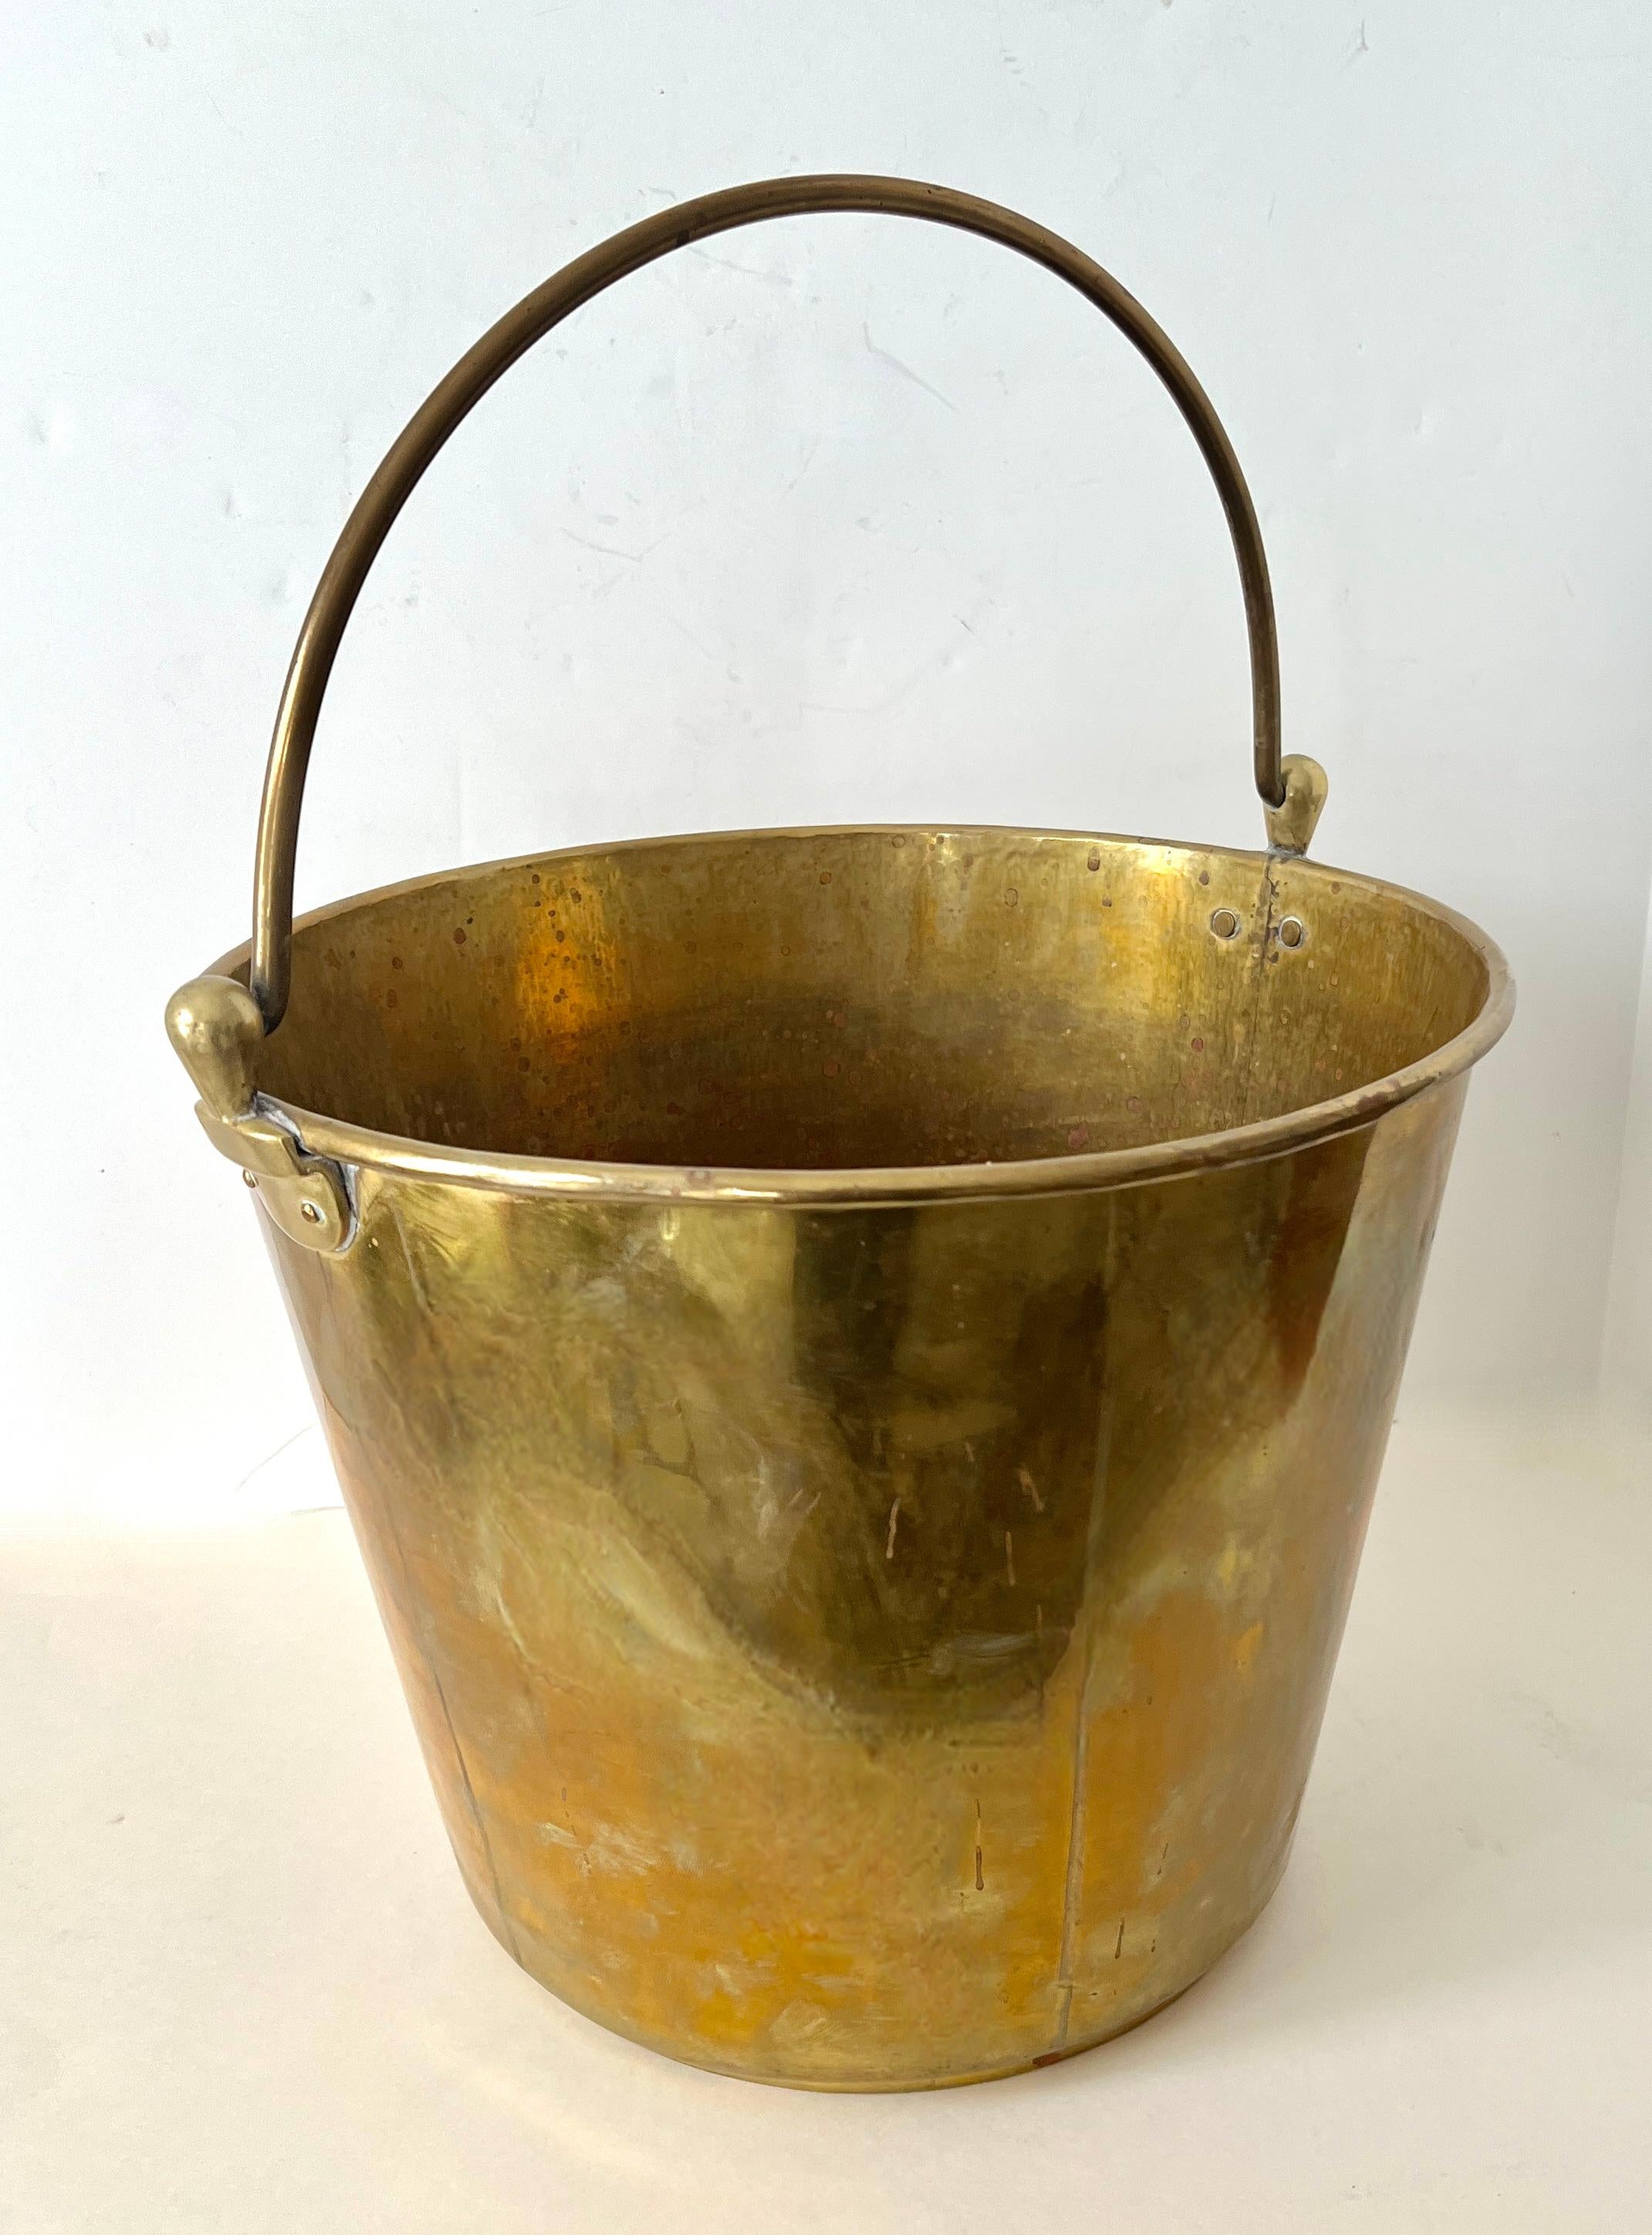 A unique pale made of brass. The handled piece has a wonderful patinated finish - while the piece could easily be polished to a high sheen, we have left the patination. 

The pale can be used in the kitchen as a waste bin, water pale, cleaning pale.